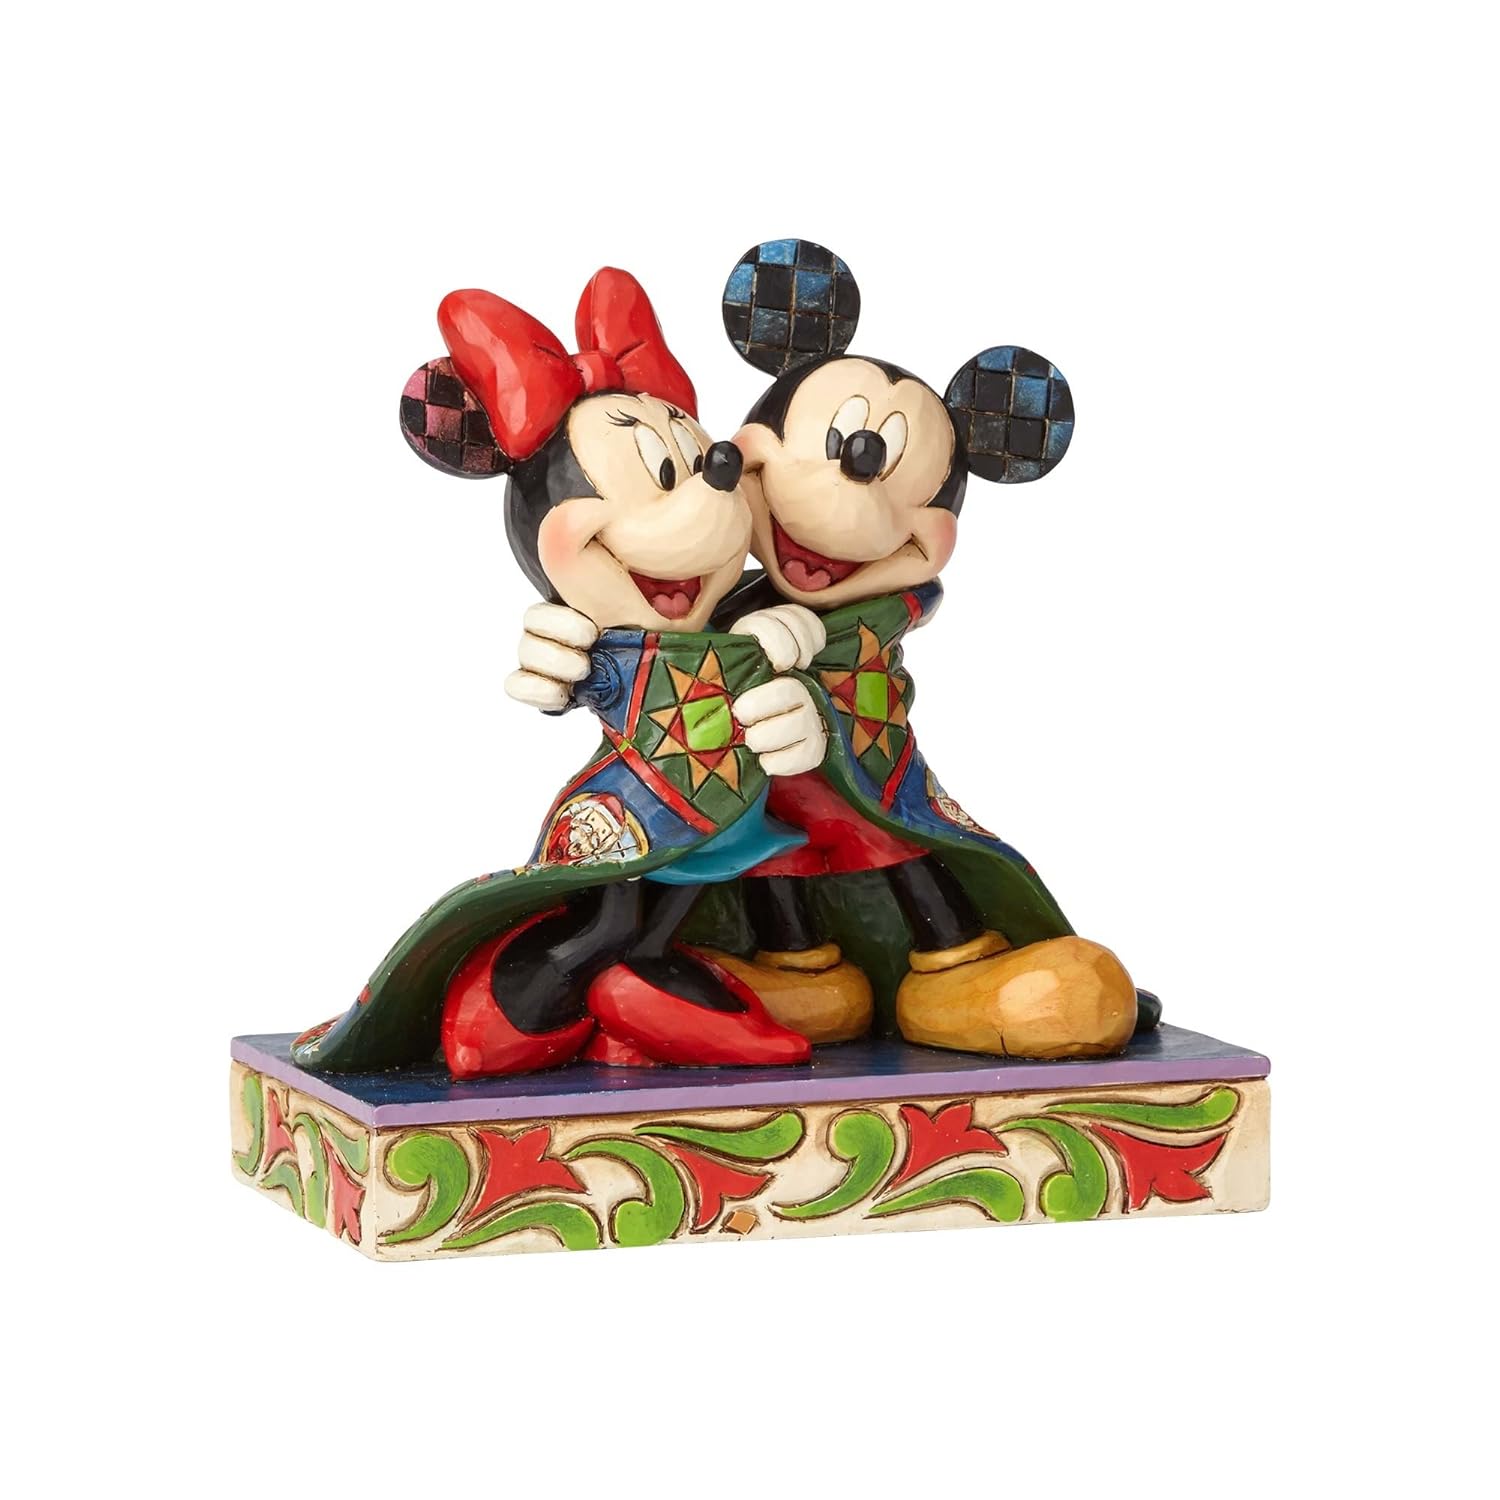 Mickey Og Minnie Med Tæppe, Mickey and Minnie Mouse in Blanket Figurine, 4057937, Mickey Mouse figur, Minnie Mouse figur, Mickey Mouse julefigur, Disney Traditions julefigur, Jim Shore julefigur, Disney figur, Disney figurer, alle Disney figurer, eventyrfigur, eventyrfigurer, eventyrlig figur, eventyrlige figurer, magisk figur, magiske figurer, Disney jul, Disney julepynt, Disney ornament, Disney juleophæng, Disney shop, Disney butik, Disney butikDK, Disney butik I Danmark, juletræspynt, jul, julepynt, juleophæng, julekugle, Disney julekugle, fra alle os til alle jer, Disney juleshow, højtid, julefigur, julefigurer, julegave, gaveide, Disney gave, Disney julegave, julepynt, en fortryllende jul, en magisk jul, Fra alle os til alle jer, Disney Juleshow, Jim shore figur, Disney traditions figure, udstillingsfigur, Disney samlerobjekt, Disney Traditions by Jim Shore, Jim Shore,